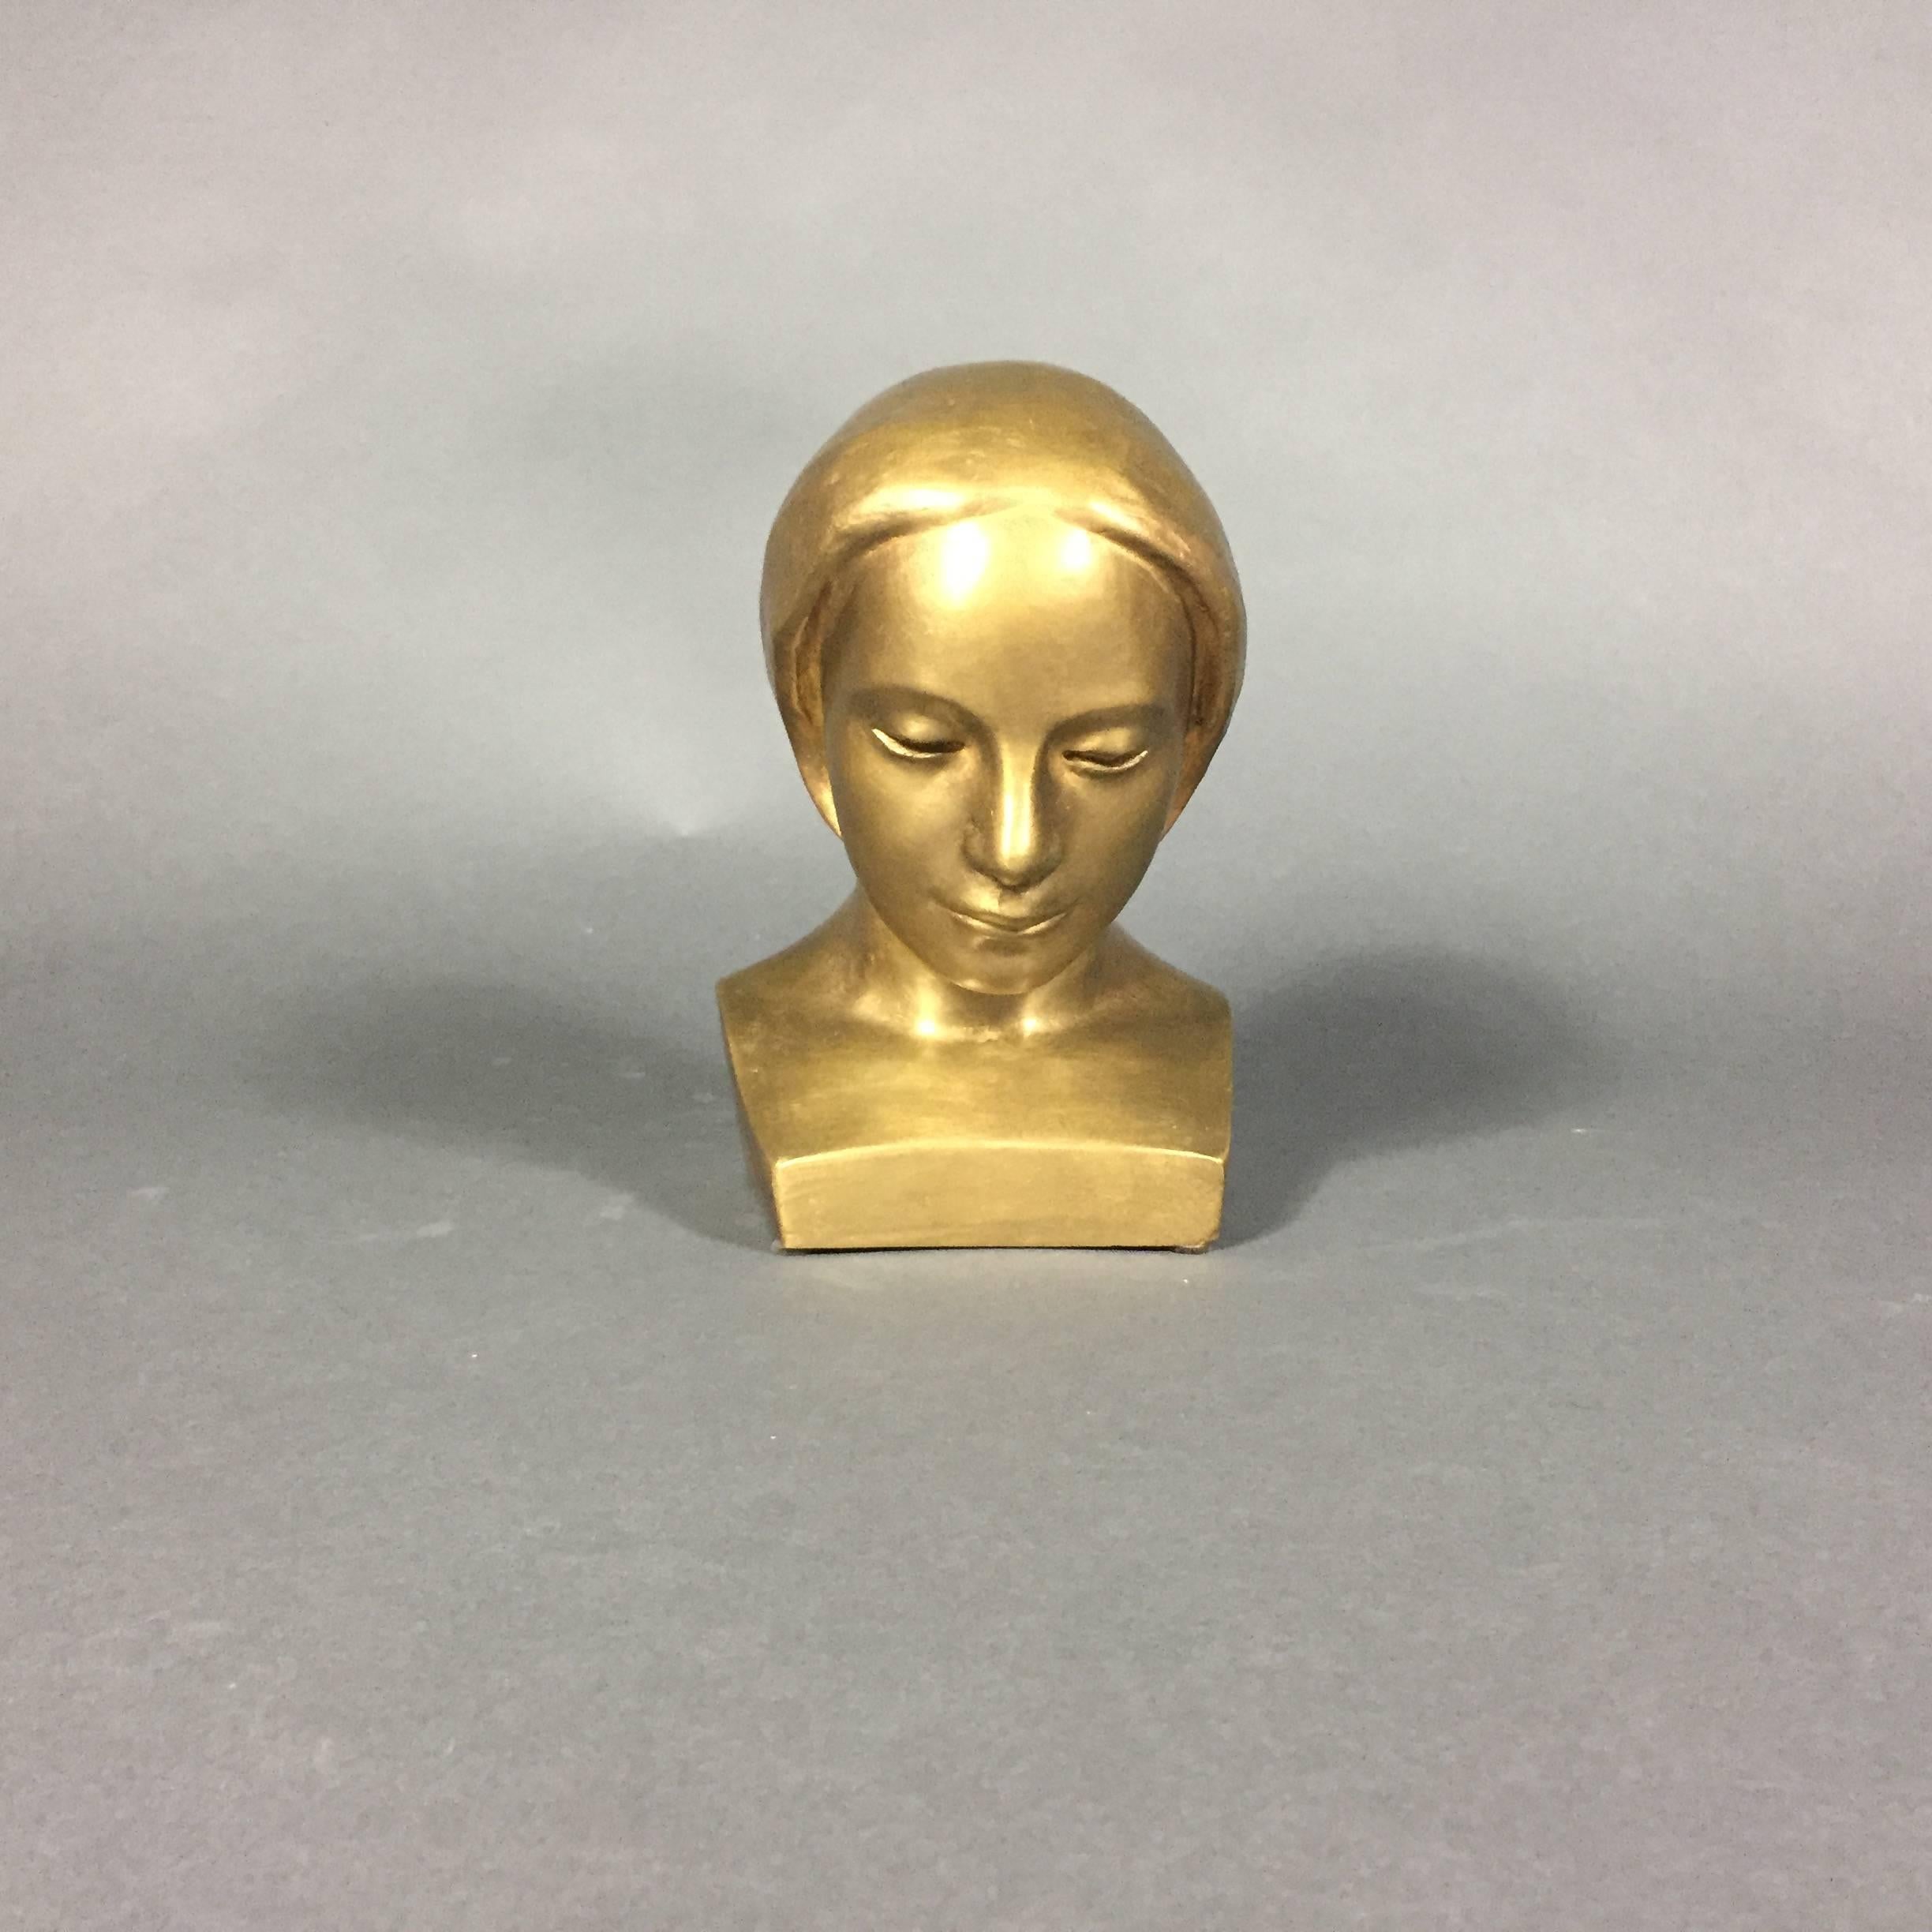 A wonderful gold painted bronze bust of a young woman, demure in aspect - calming and transcendent.  Completed by Swedish artist Curt Hansson (1907-1980), Sweden.  Initialed and dated on side CH 53.